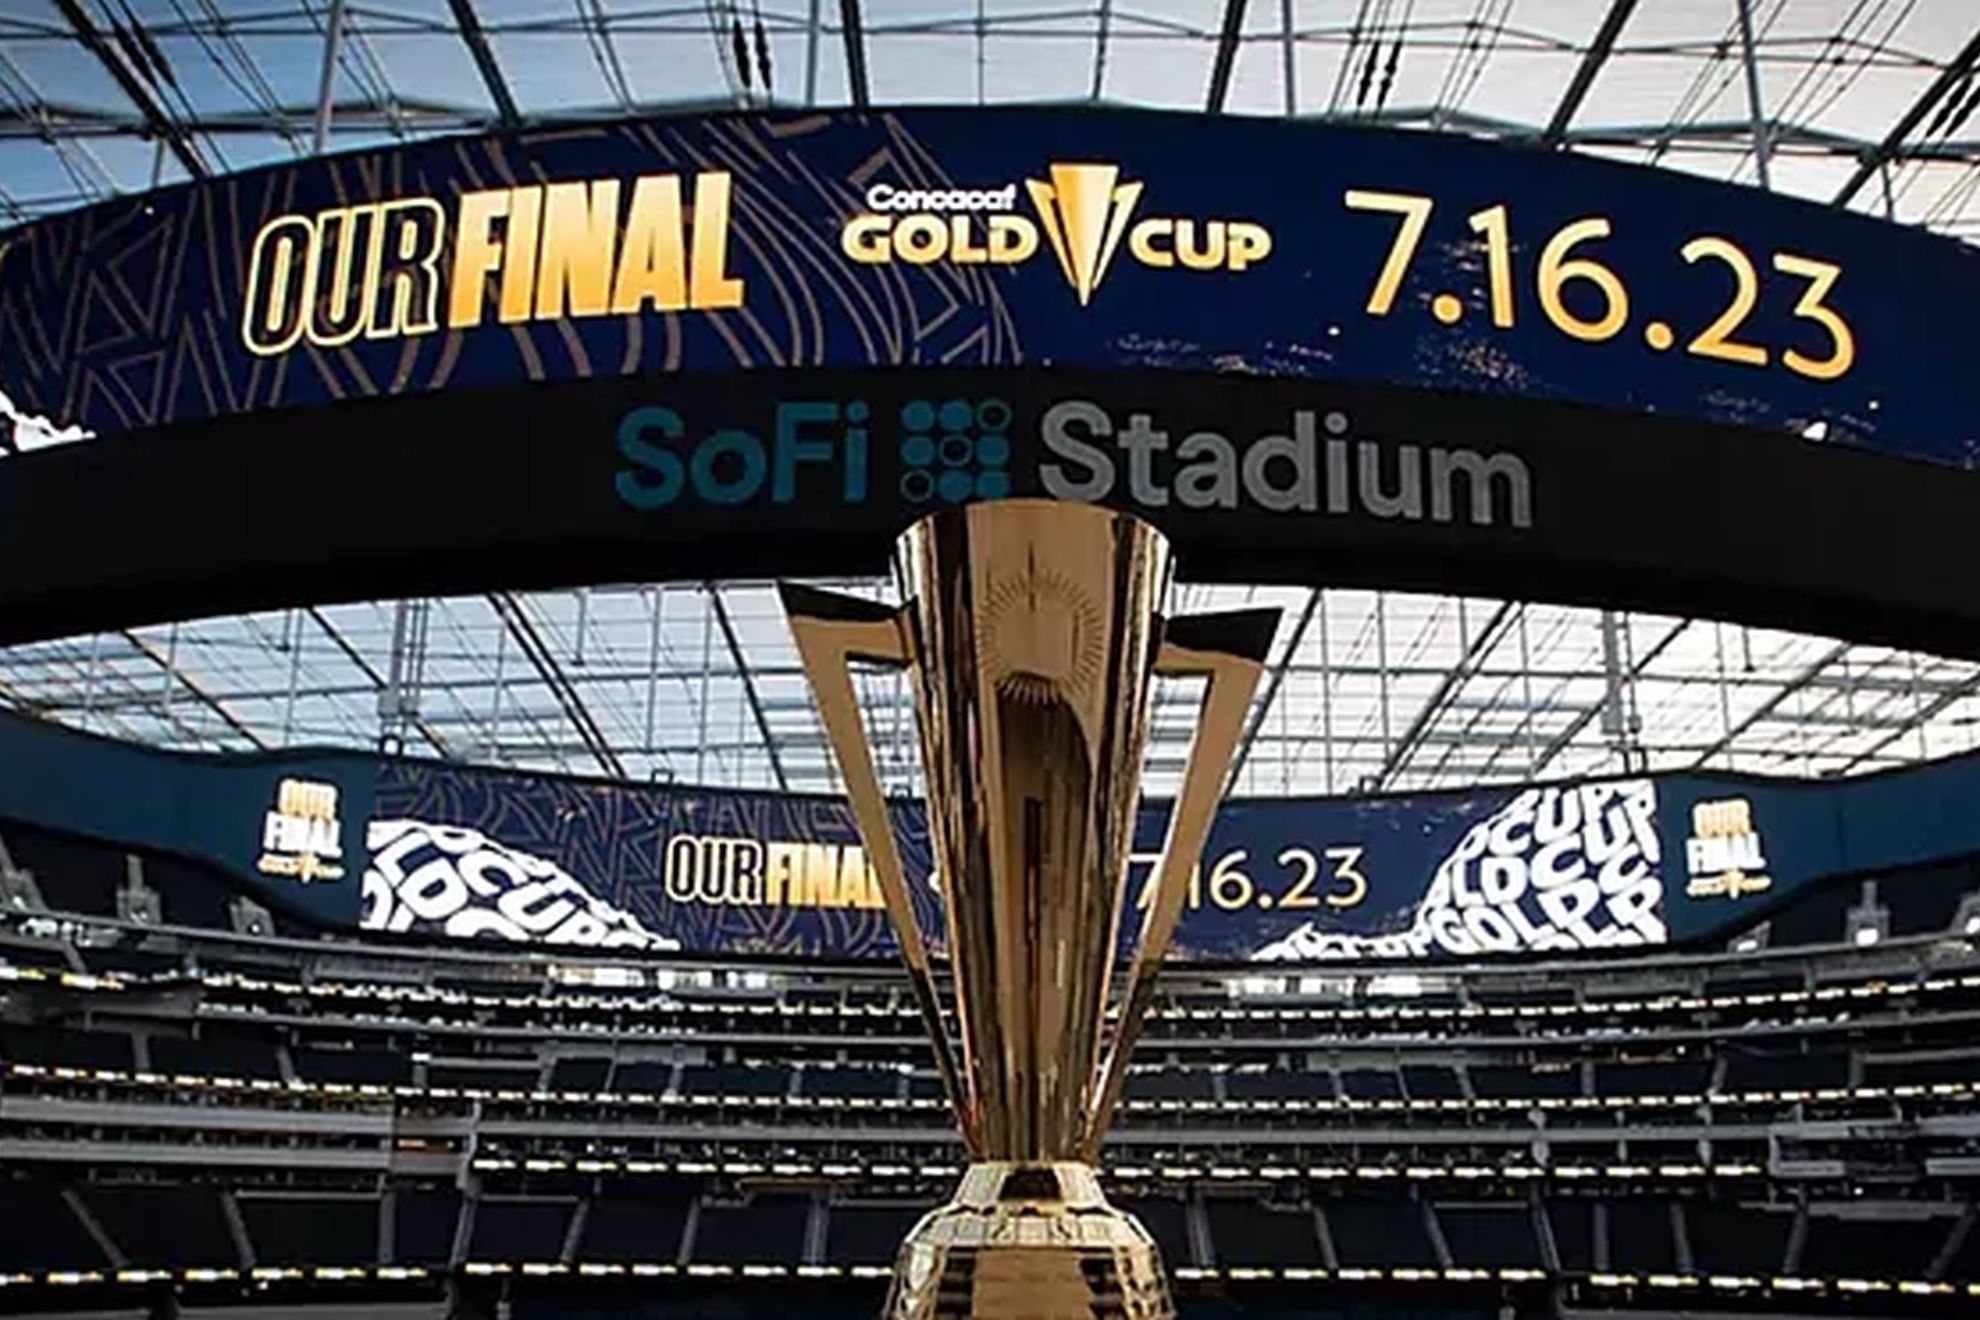 The 2025 Gold Cup will invite guest nations from UEFA and CONMEBOL